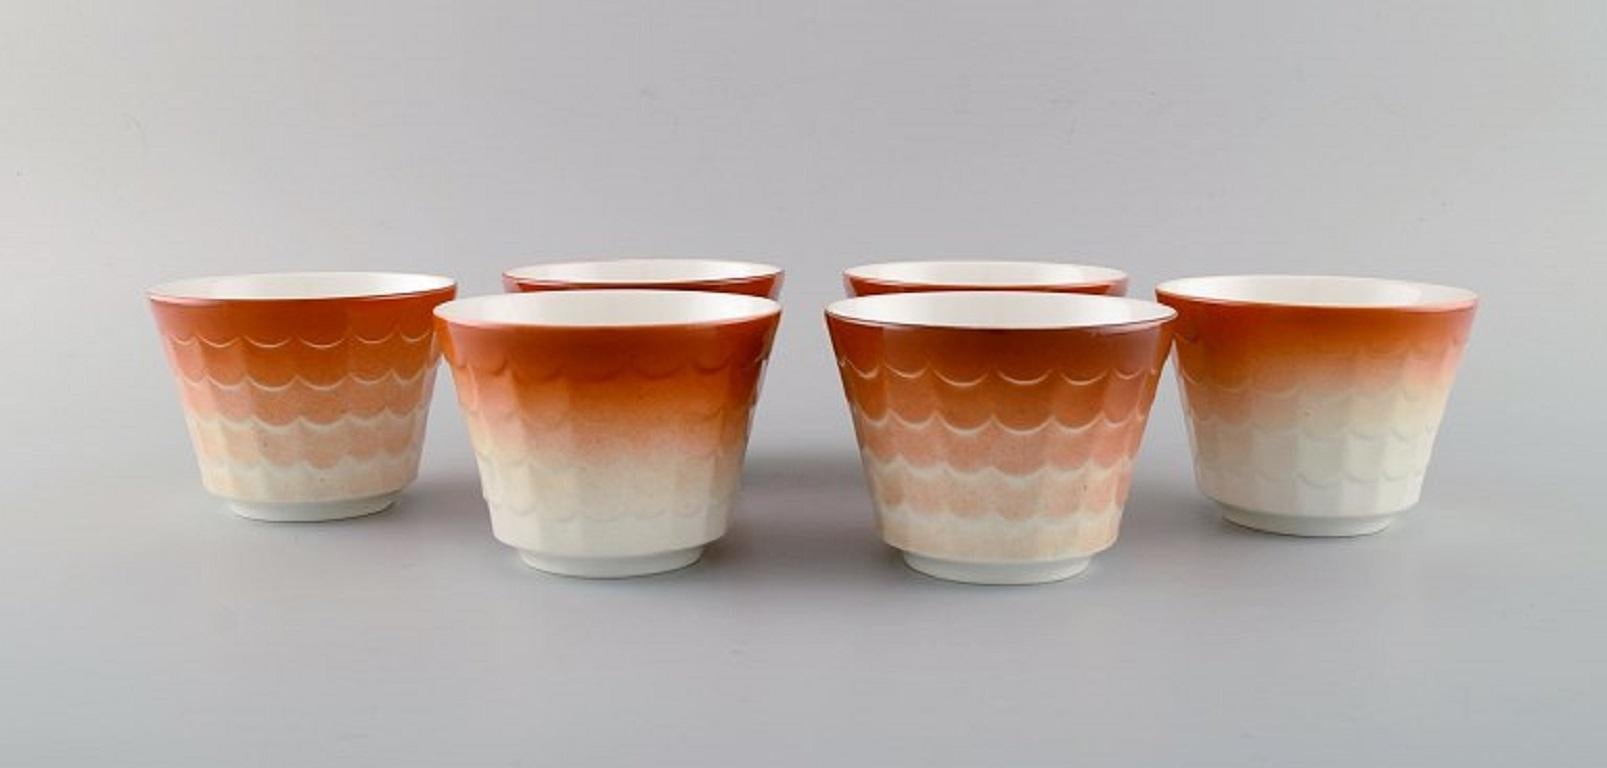 Wilhelm Kåge for Gustavsberg. Six flower pot covers in porcelain. Swedish design, 1960s.
Measures: 10.5 x 8 cm.
In excellent condition.
Stamped.